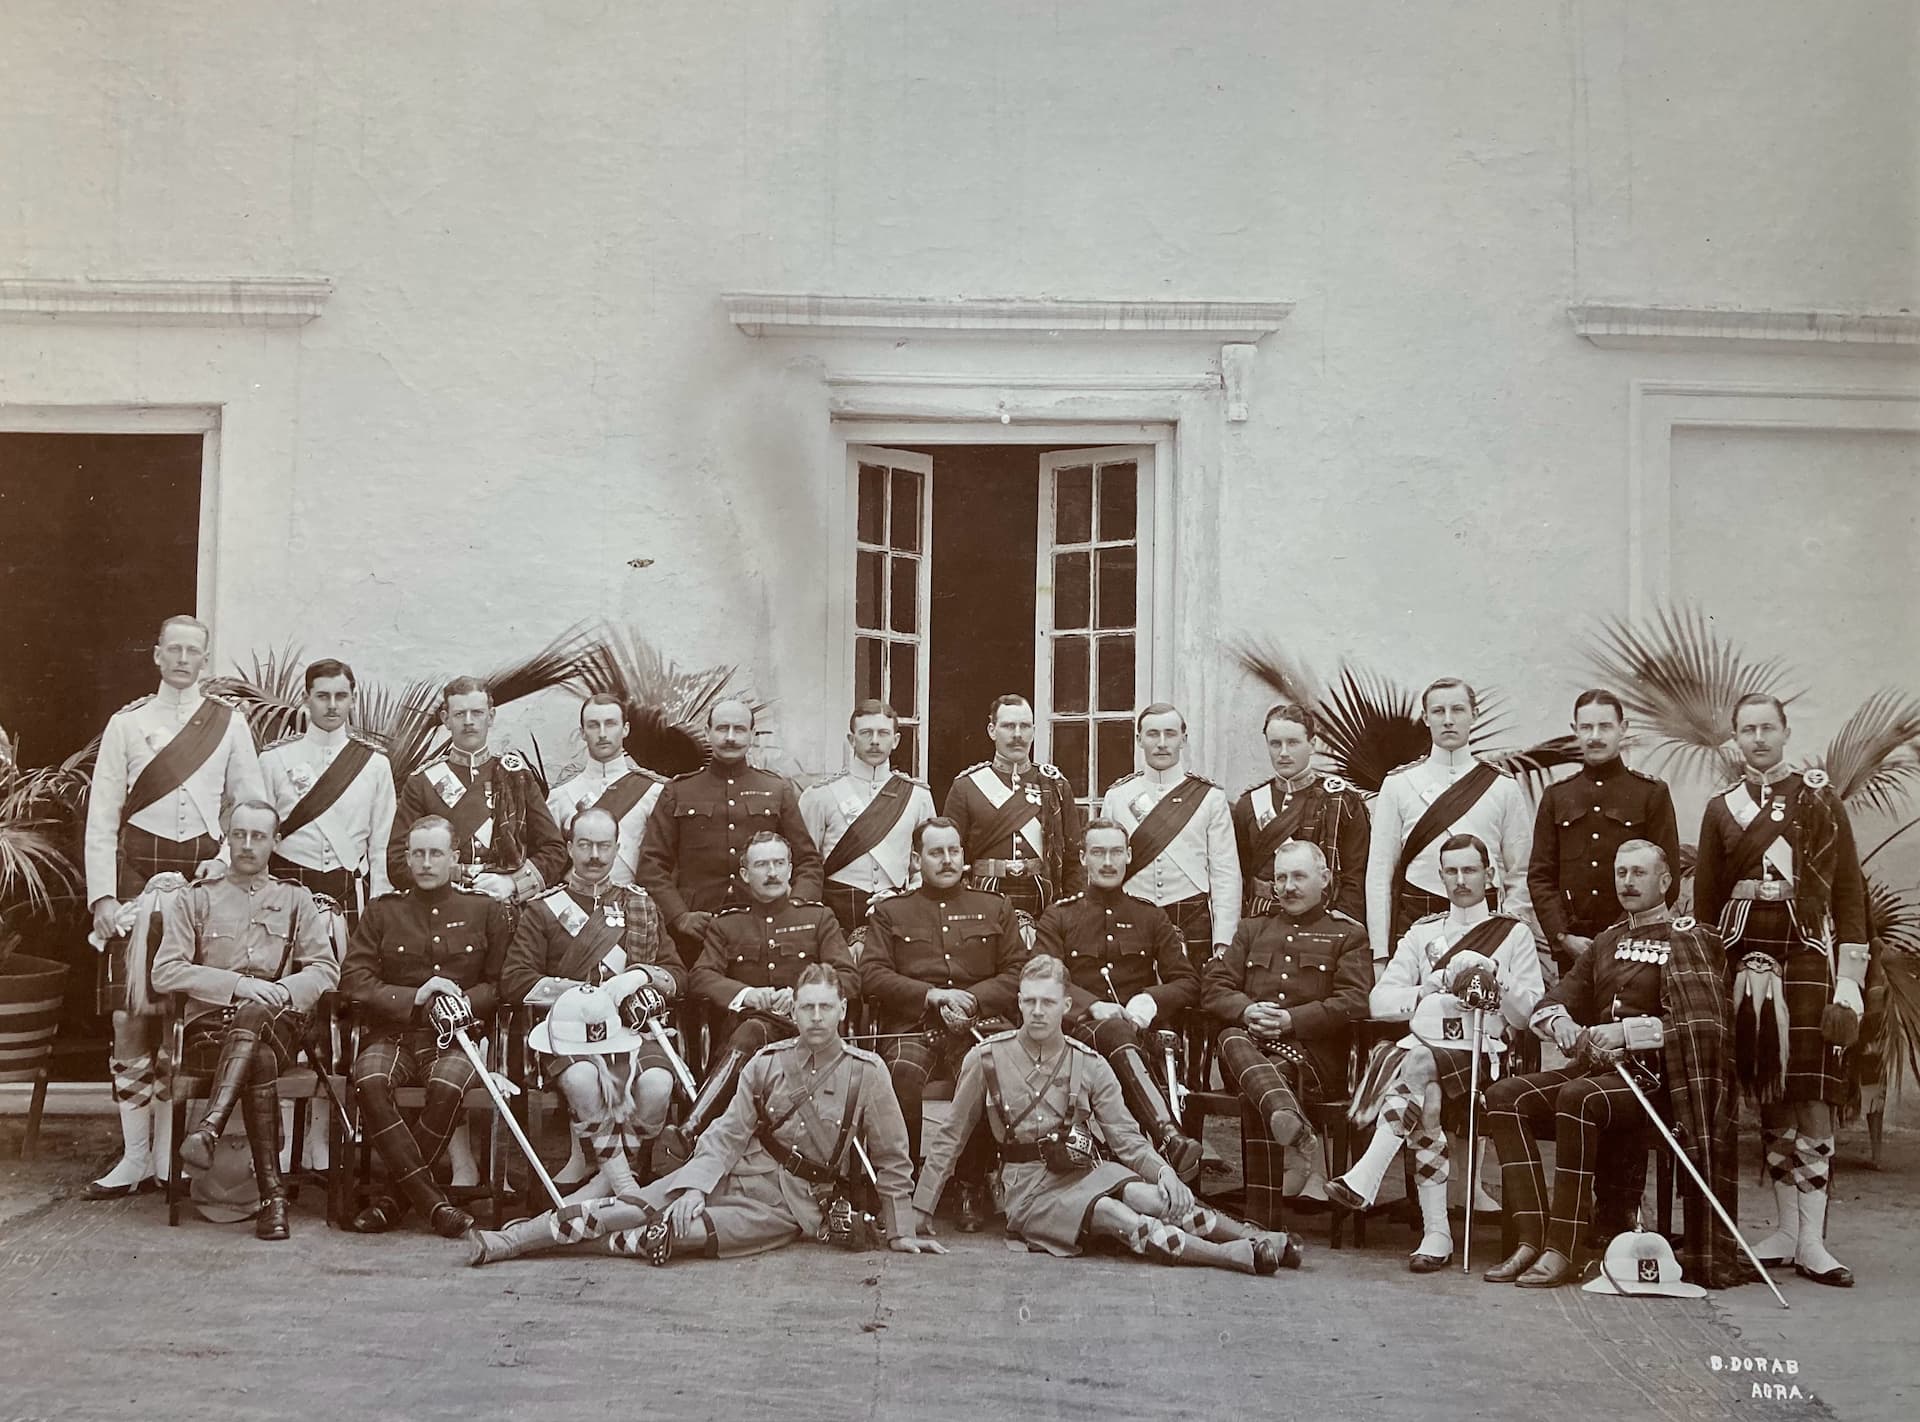 Officers of the 1st Battalion Seaforth Highlanders, Agra, India, 1912